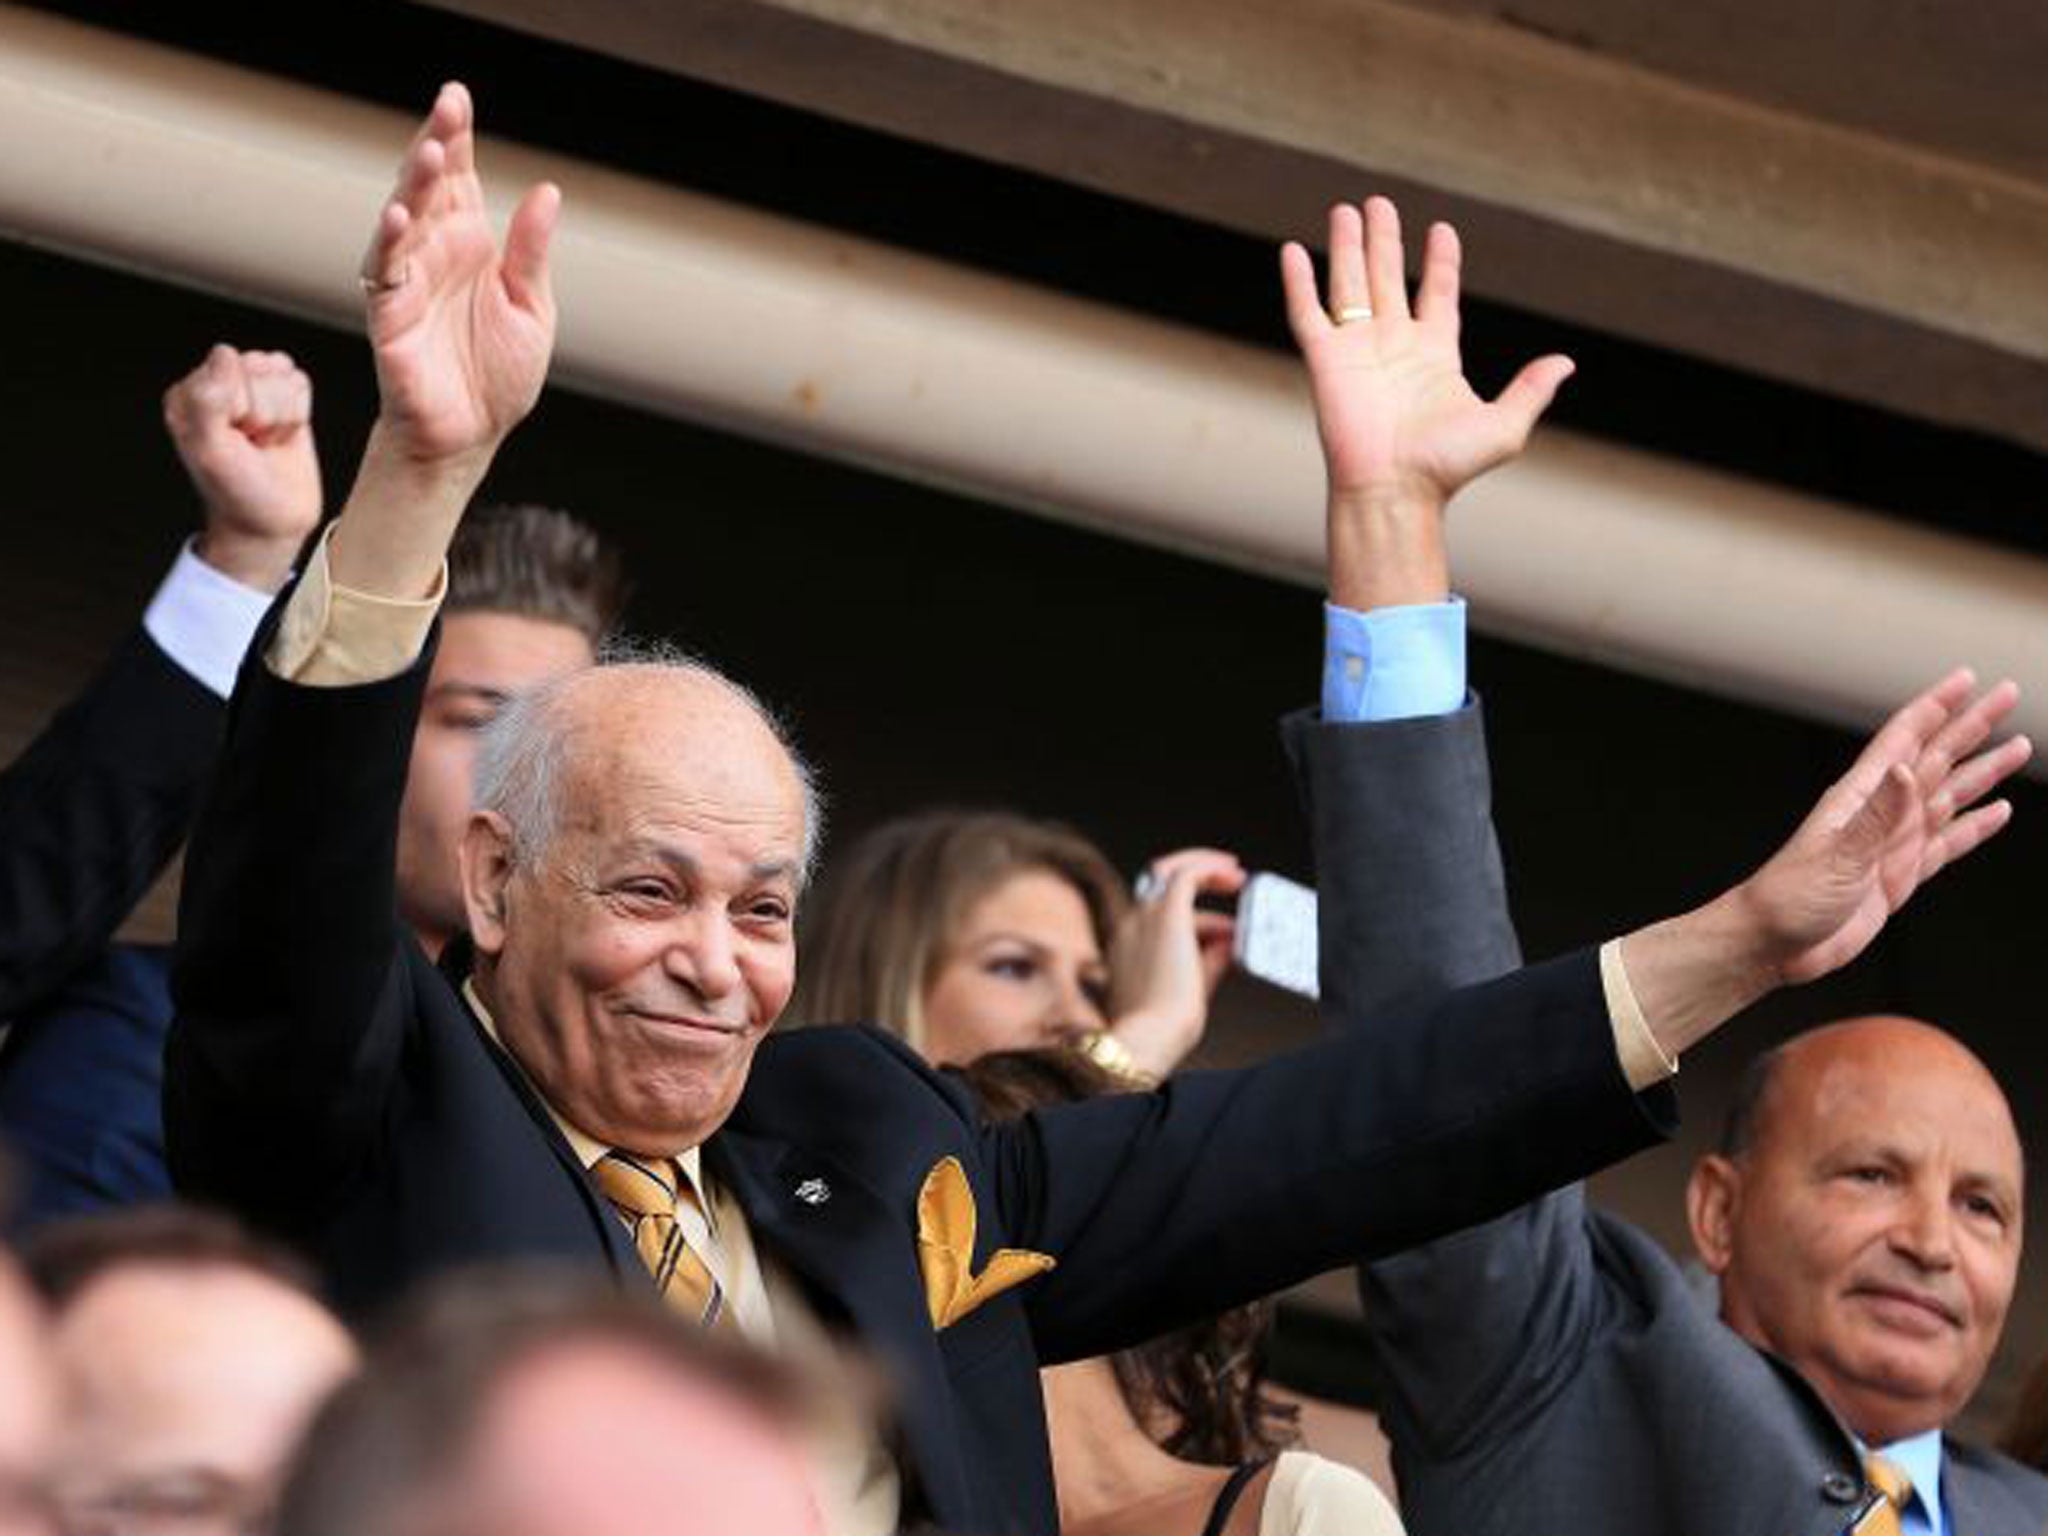 Assem Allam, left, is critical of fans who tried to unfurl a protest banner at the Palace game